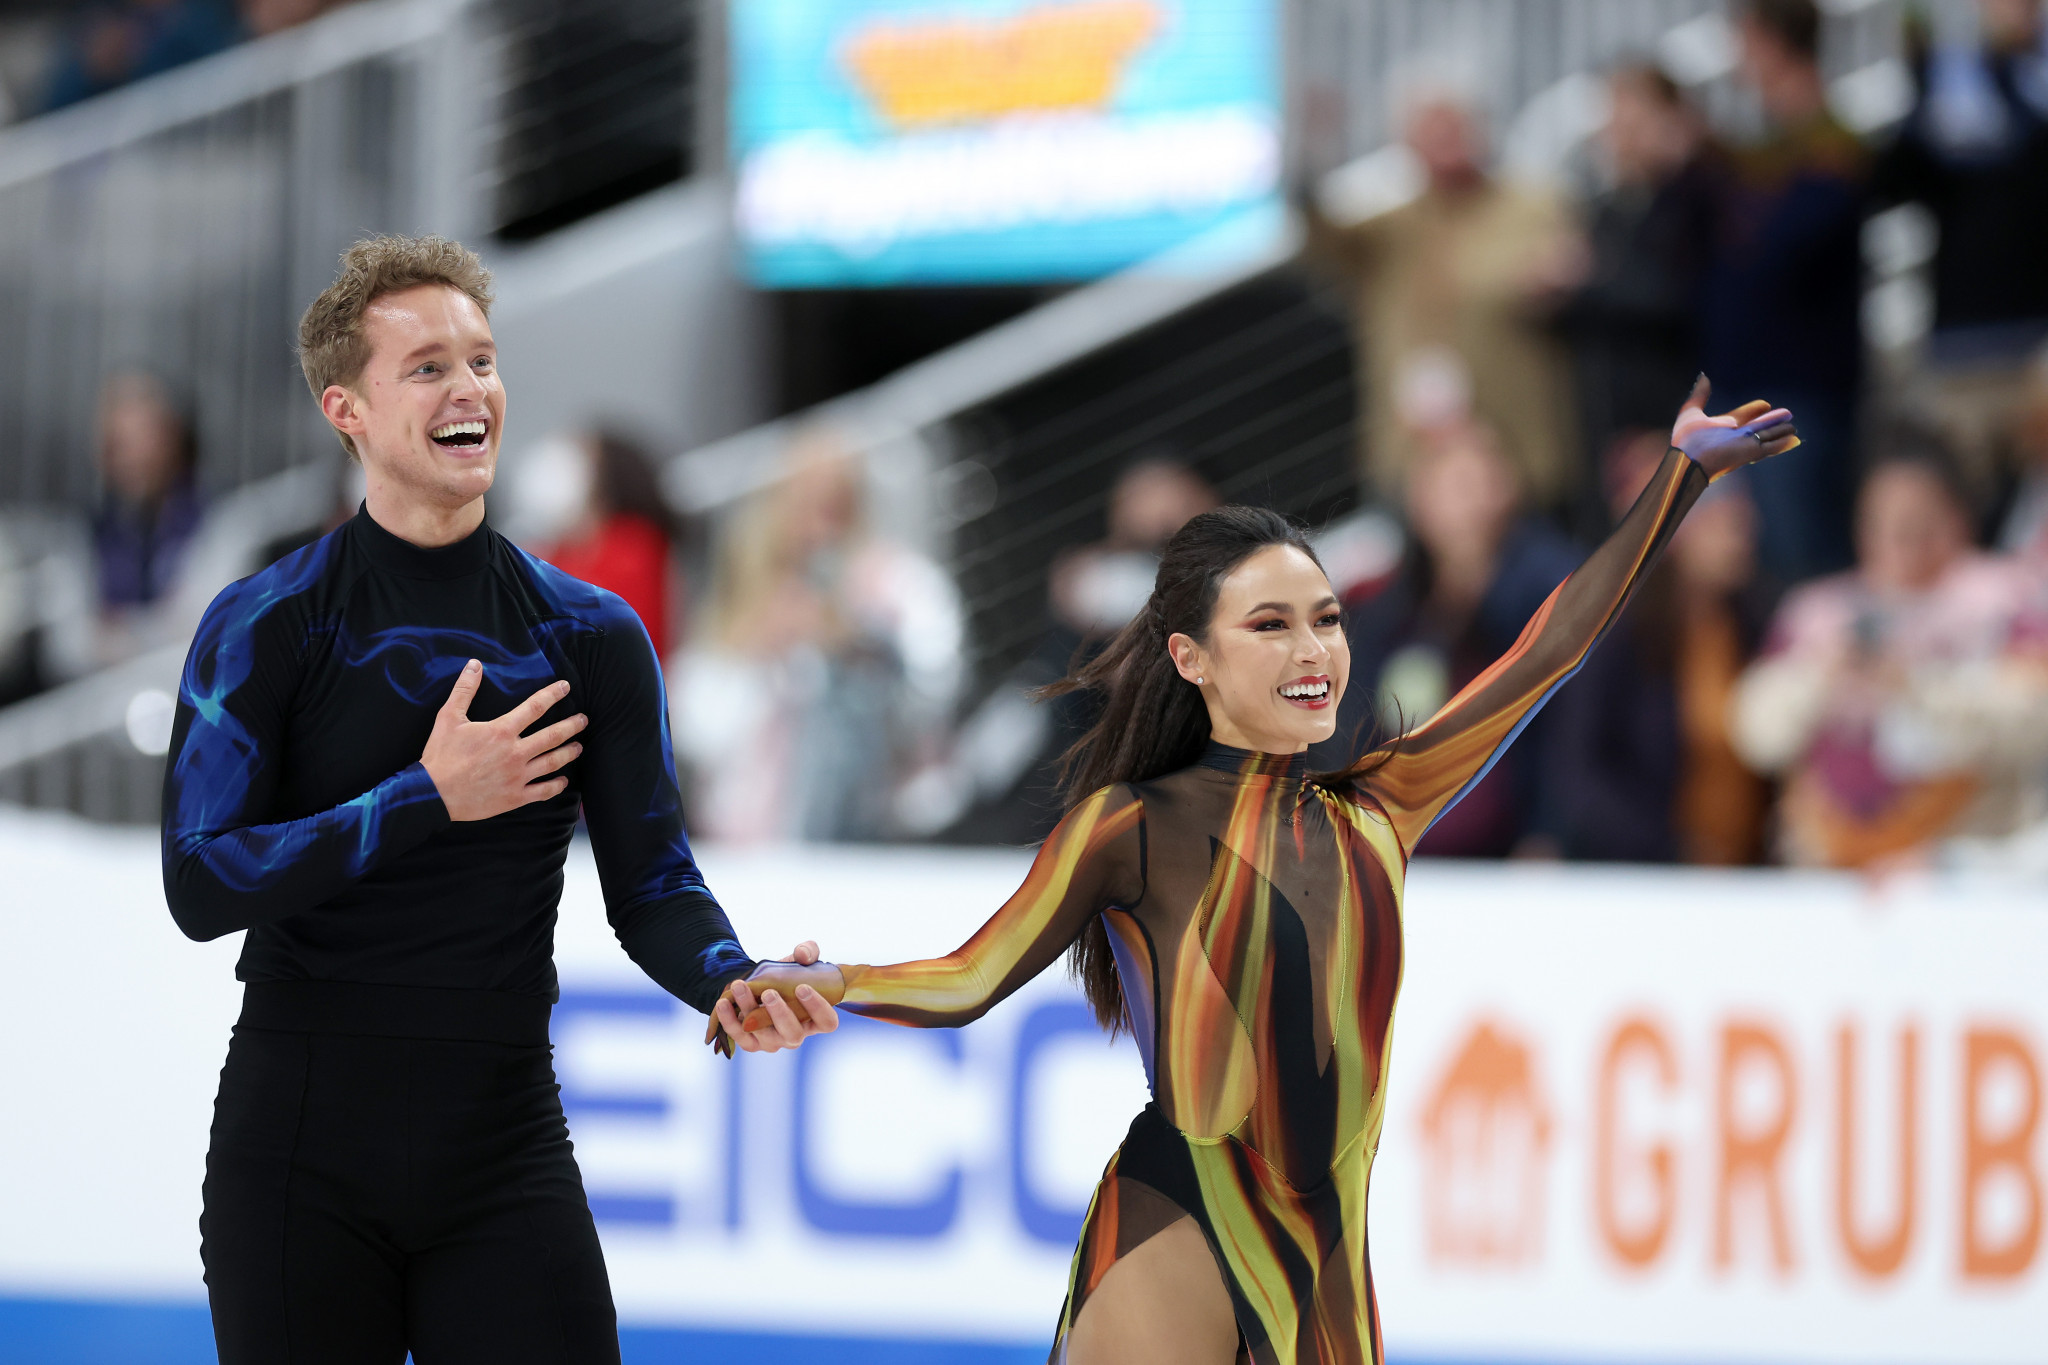 Madison Chock and Evan Bates won ice dance gold in Colorado Springs ©Getty Images